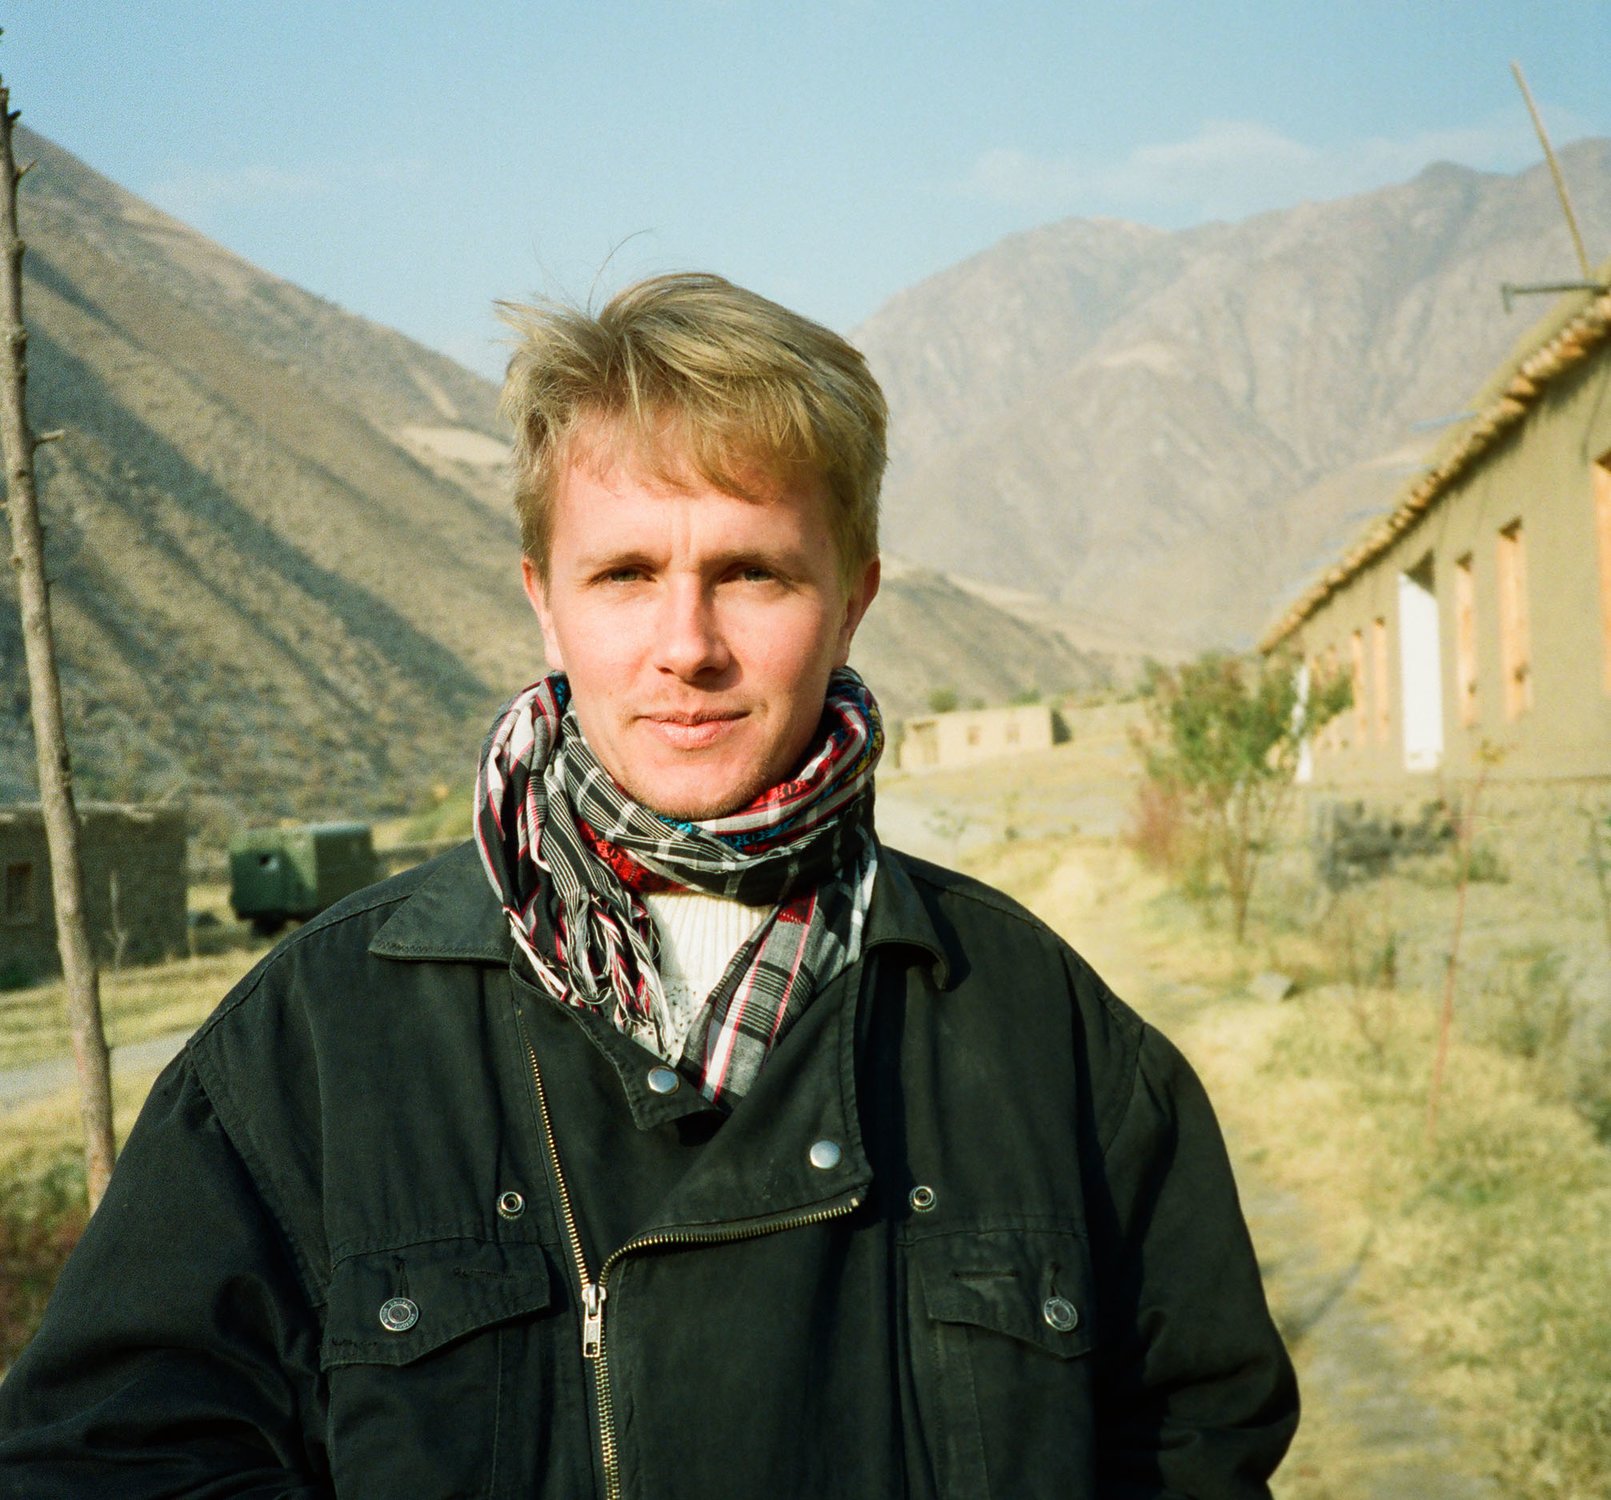 Chris Woolf, Bumbling Through the Hindu Kush: A Memoir of Fear and Kindness in Afghanistan coffee or die